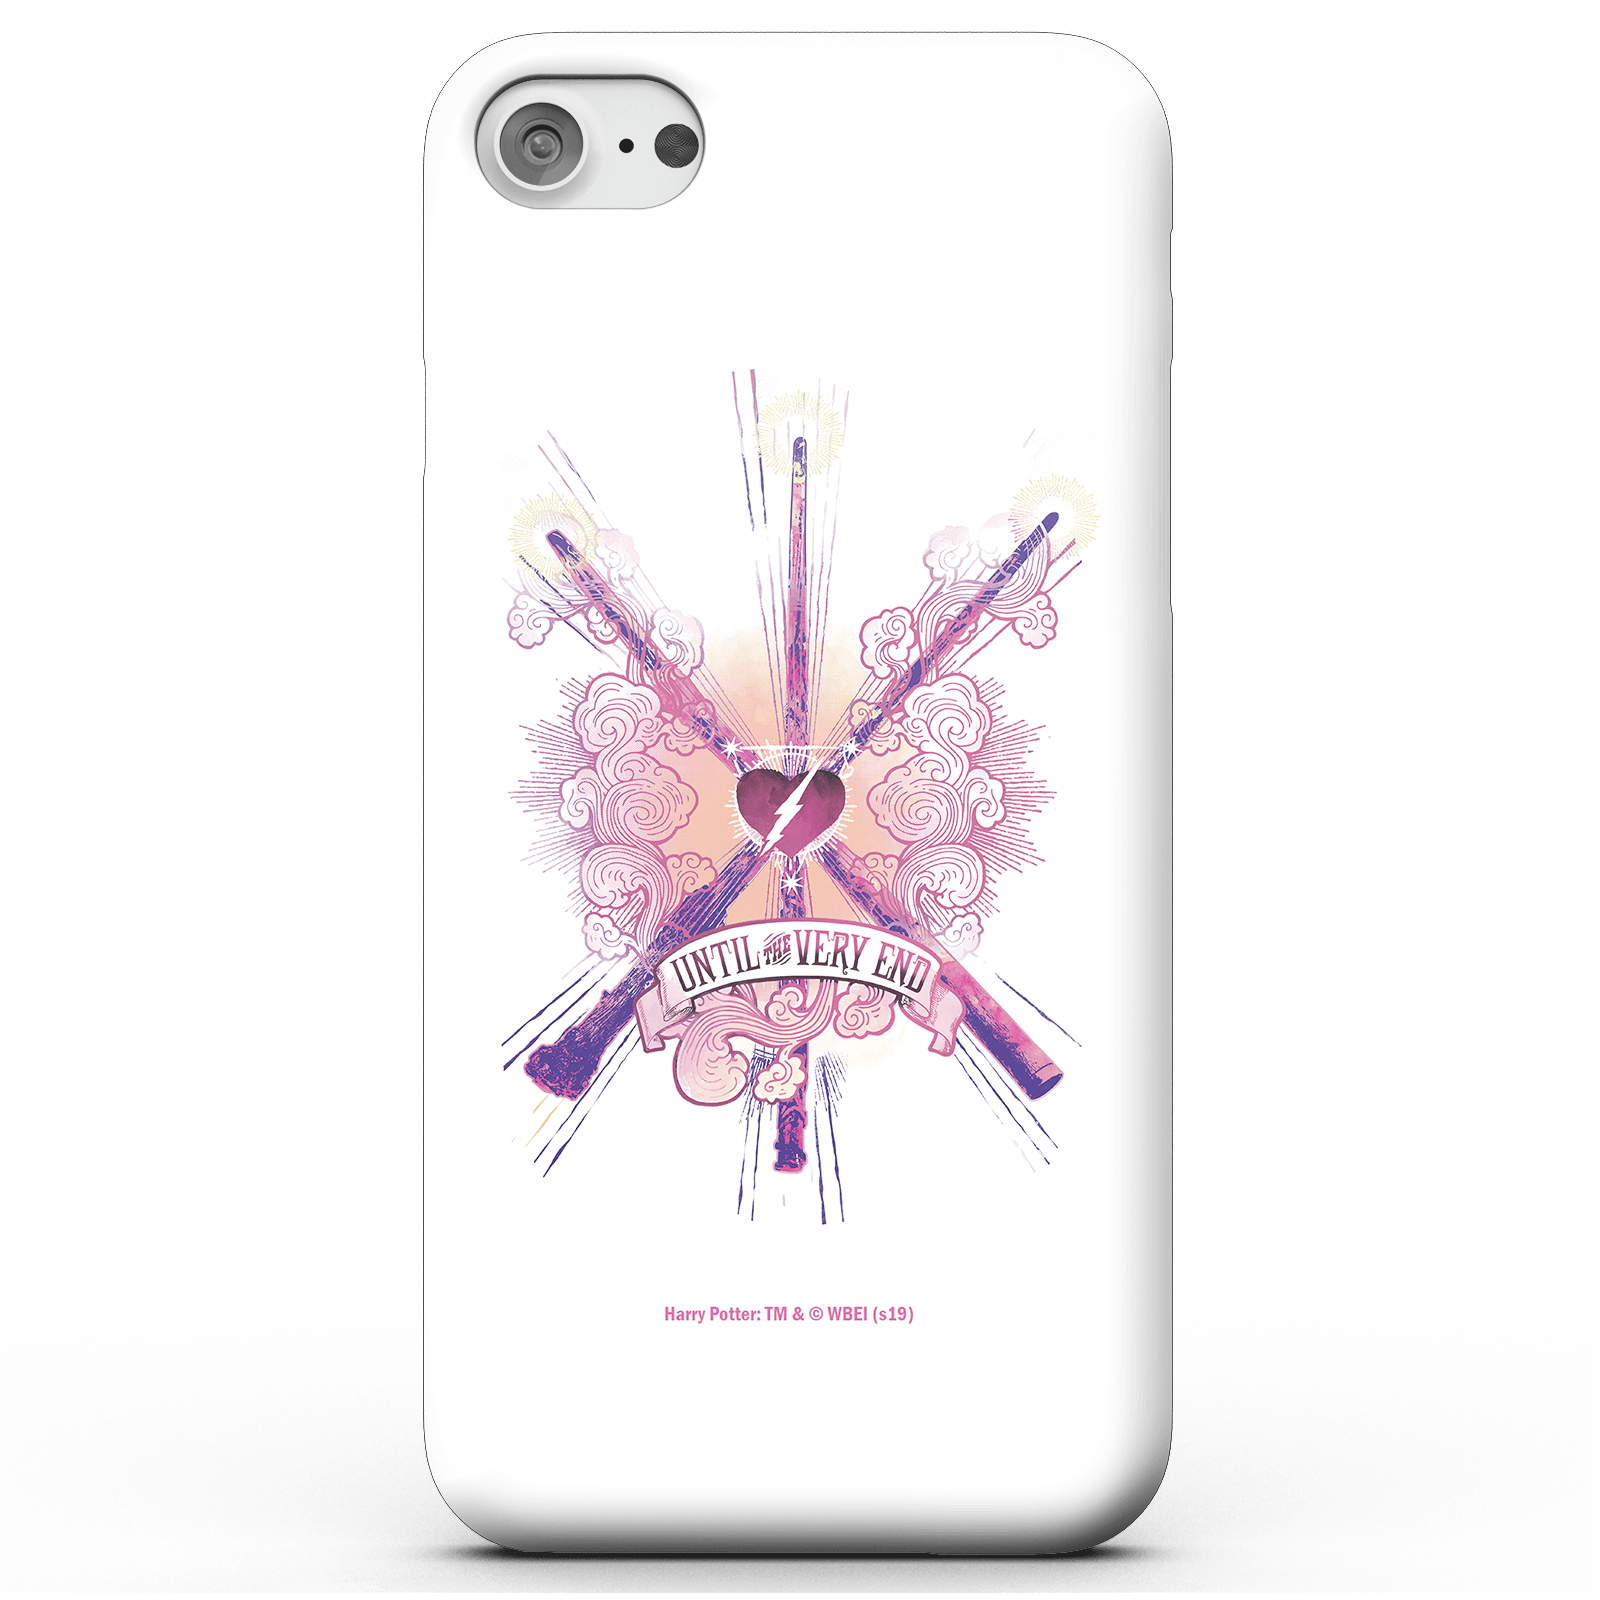 Harry Potter Until The Very End Phone Case for iPhone and Android - iPhone 8 Plus - Snap Case - Gloss